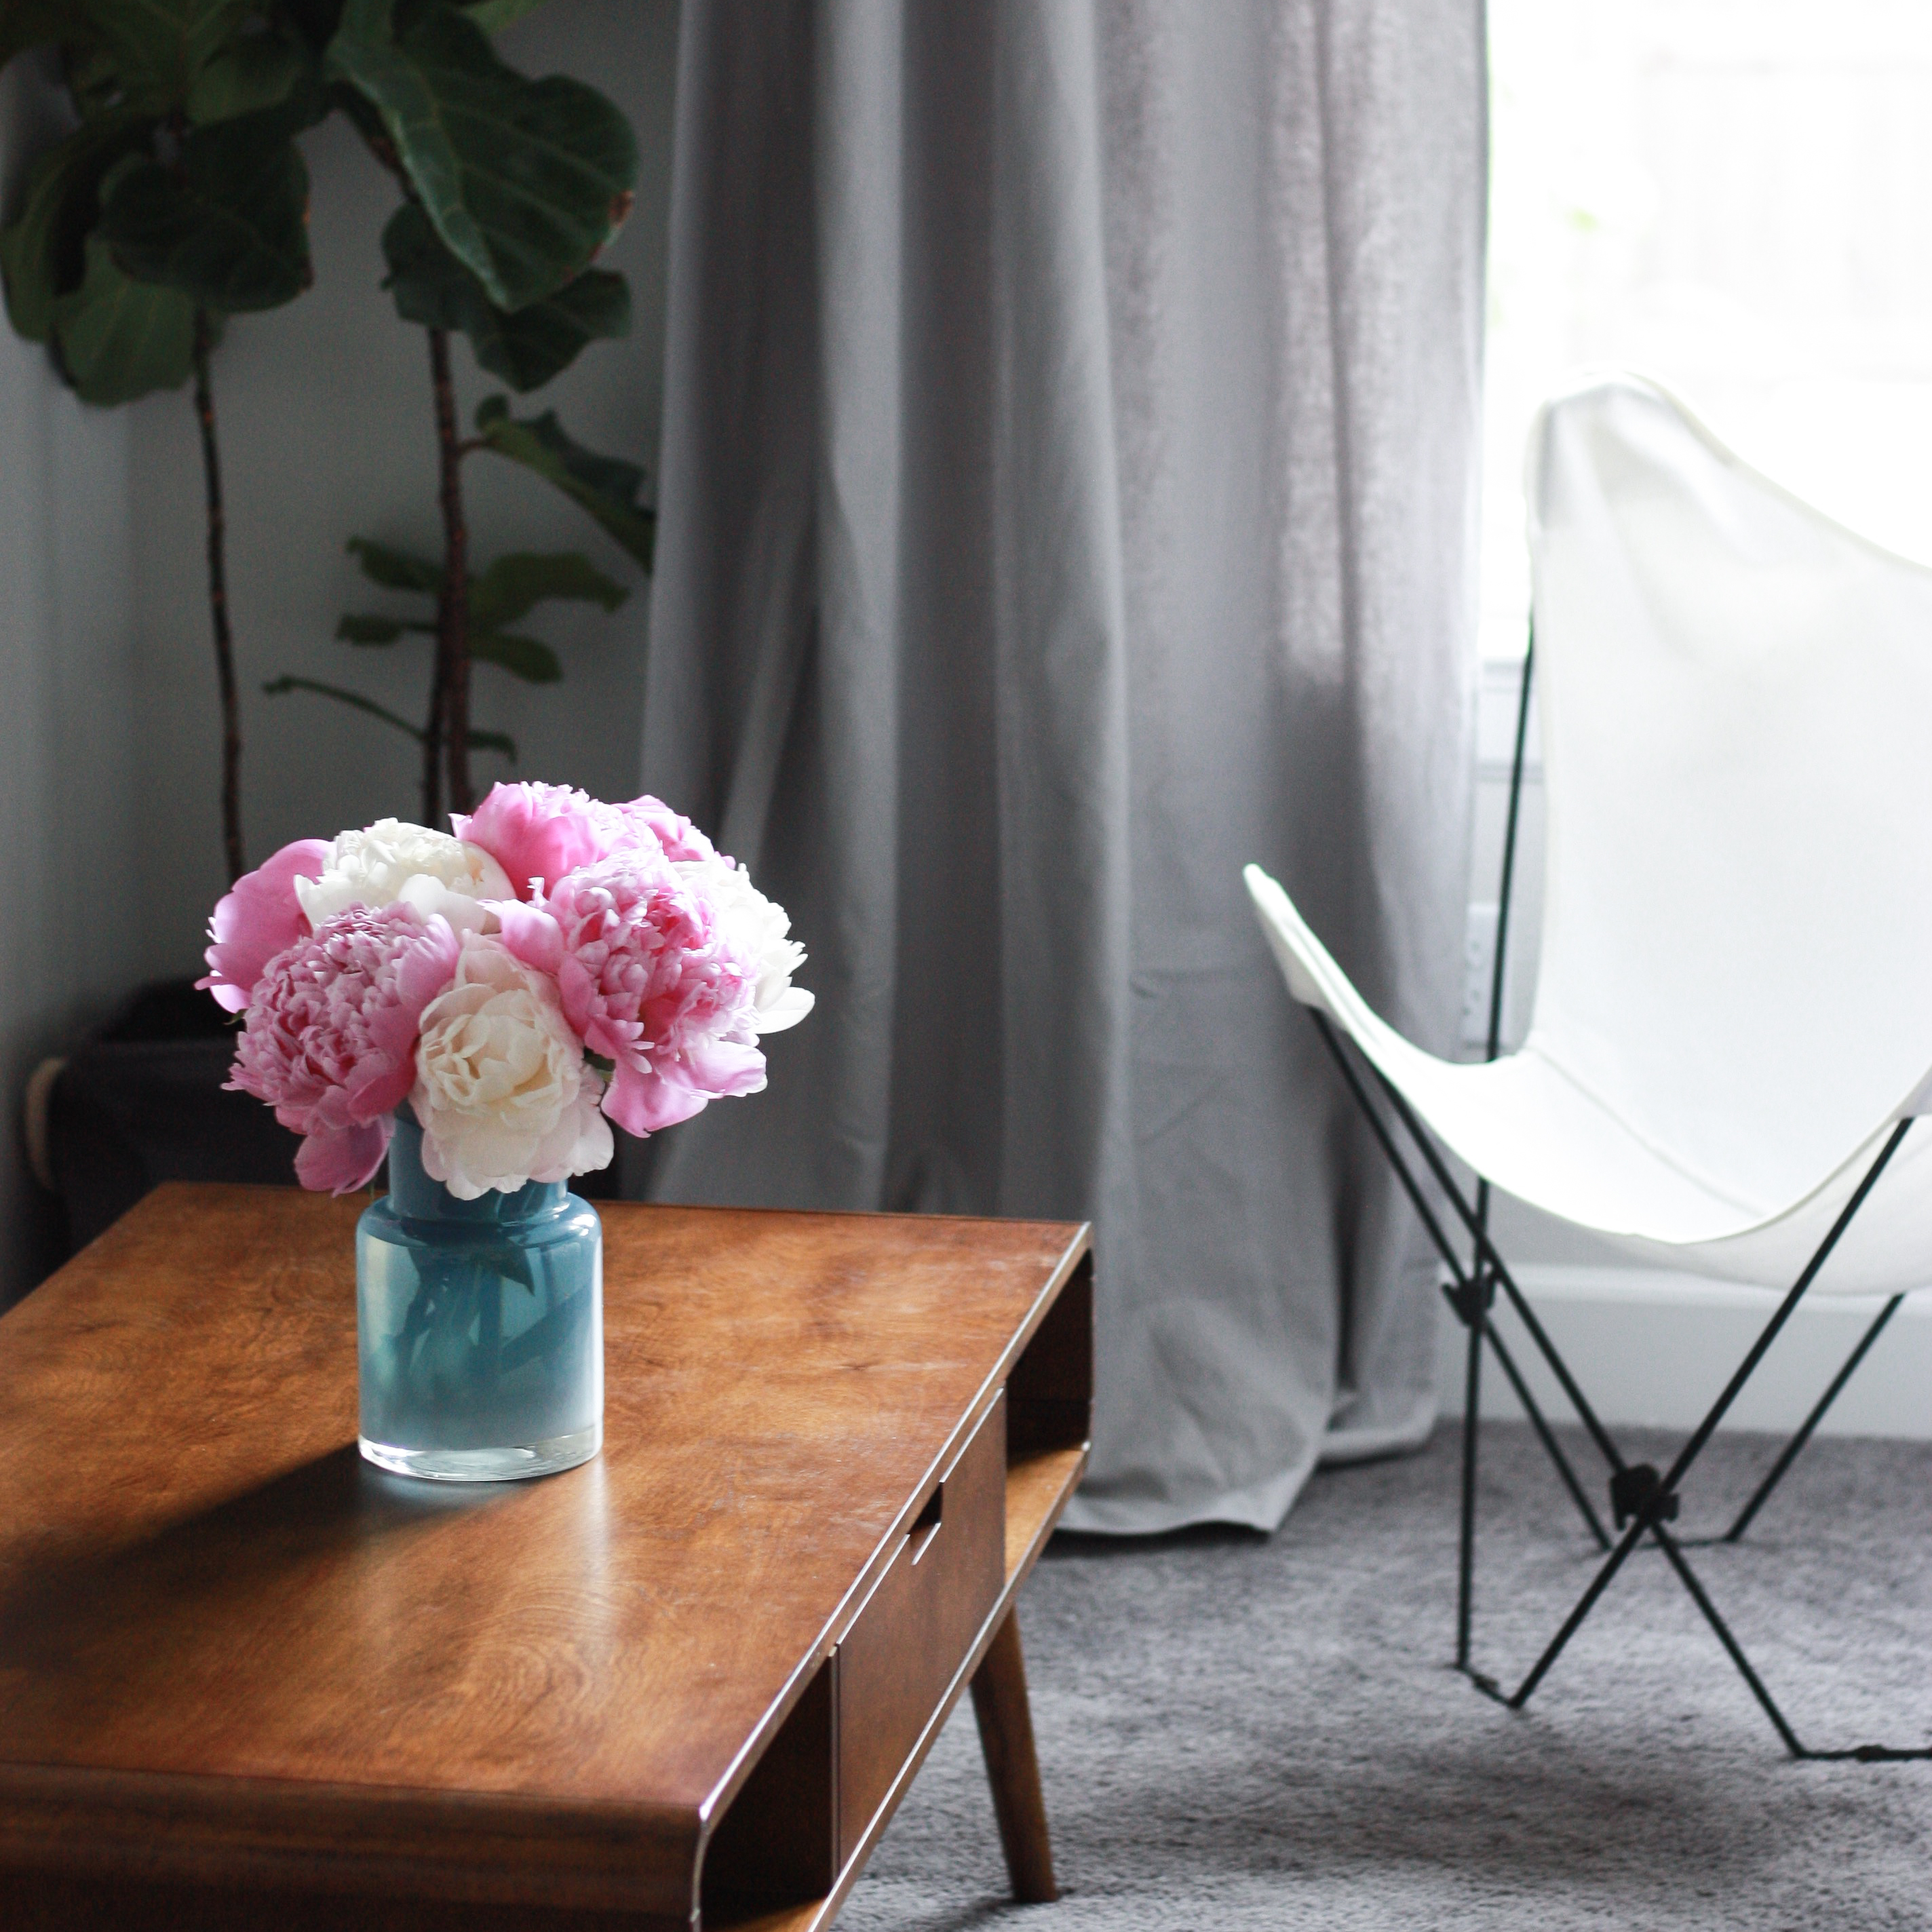 Peonies Forever - One Little Minute Blog